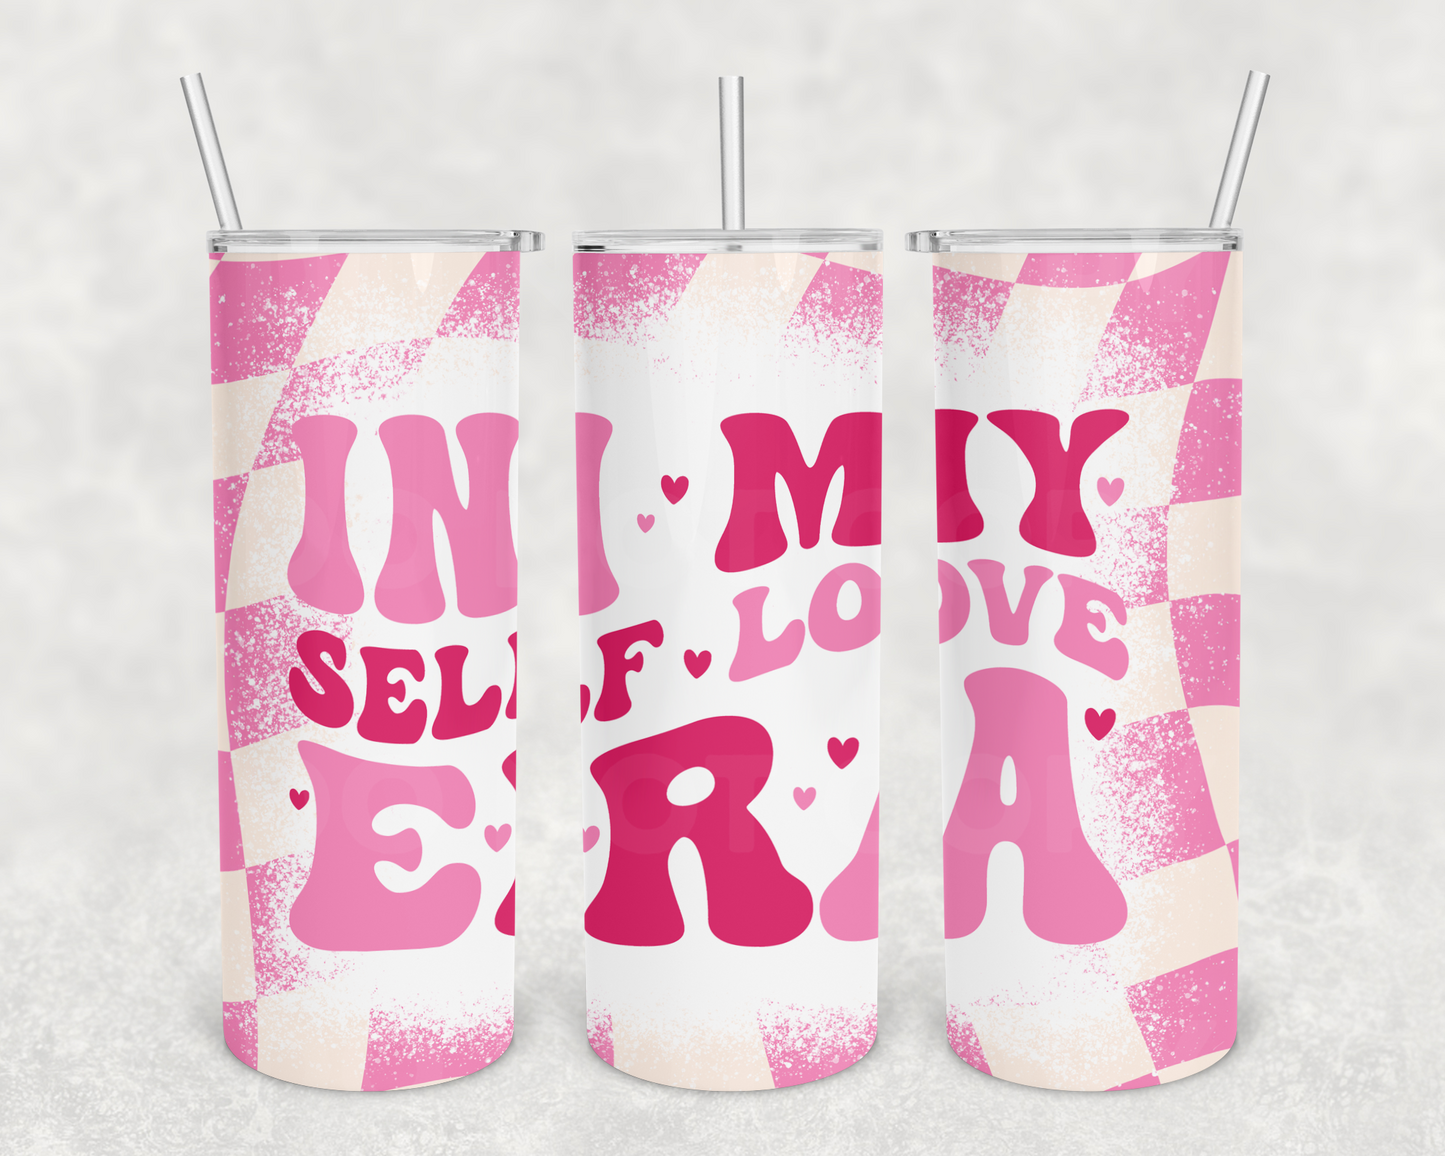 In my self love era 20 oz tumbler (finished product)